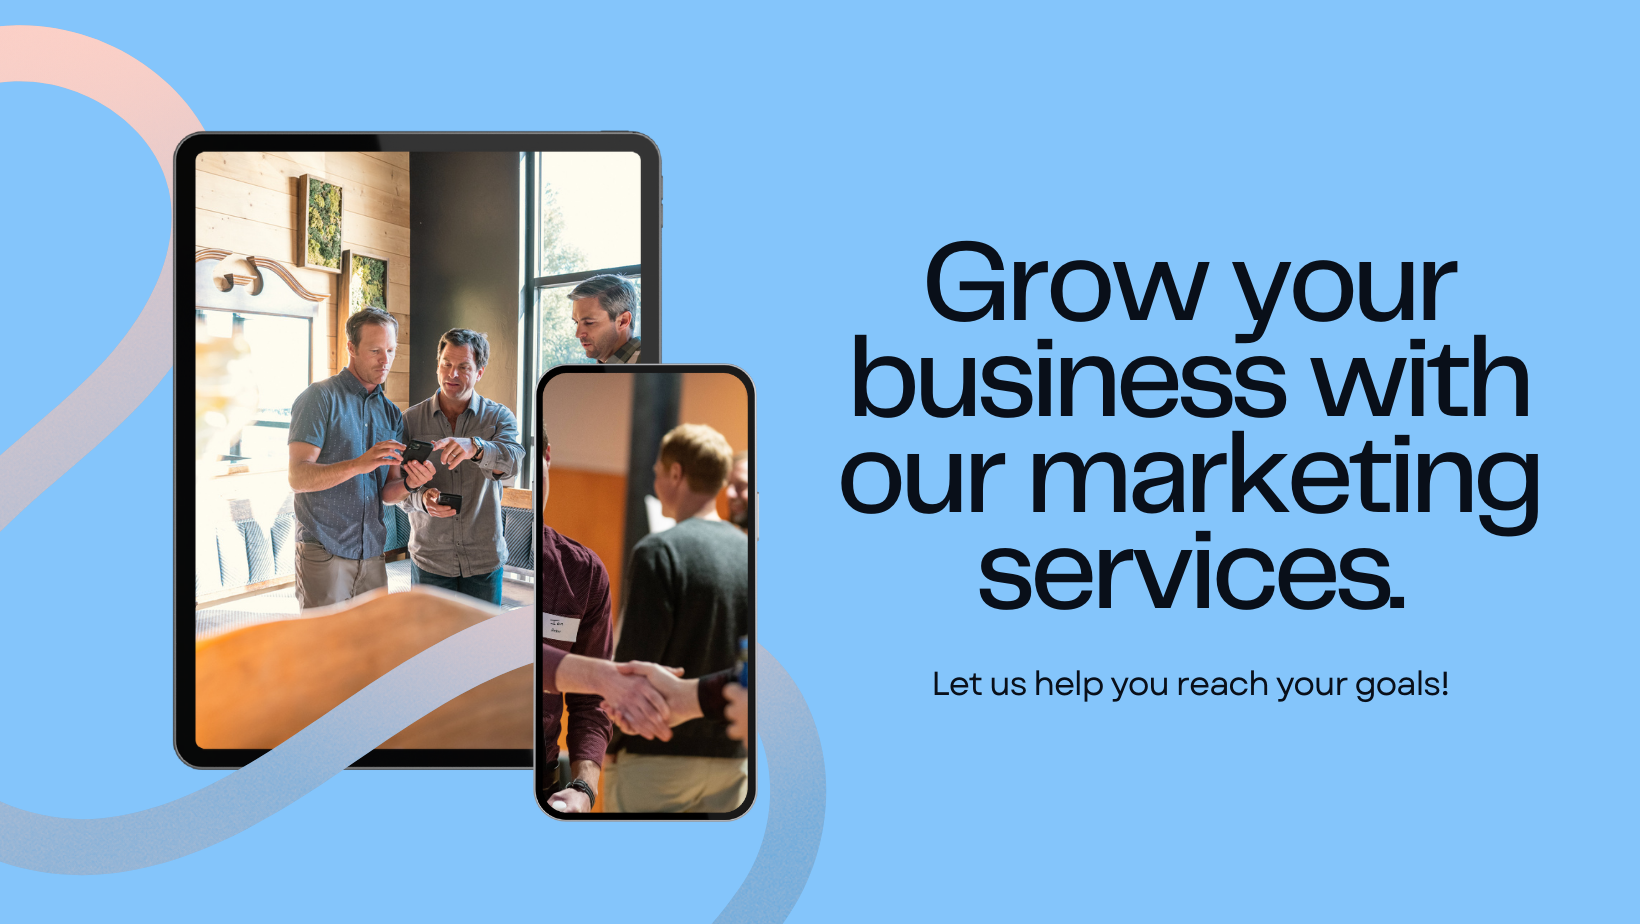 marketing services images